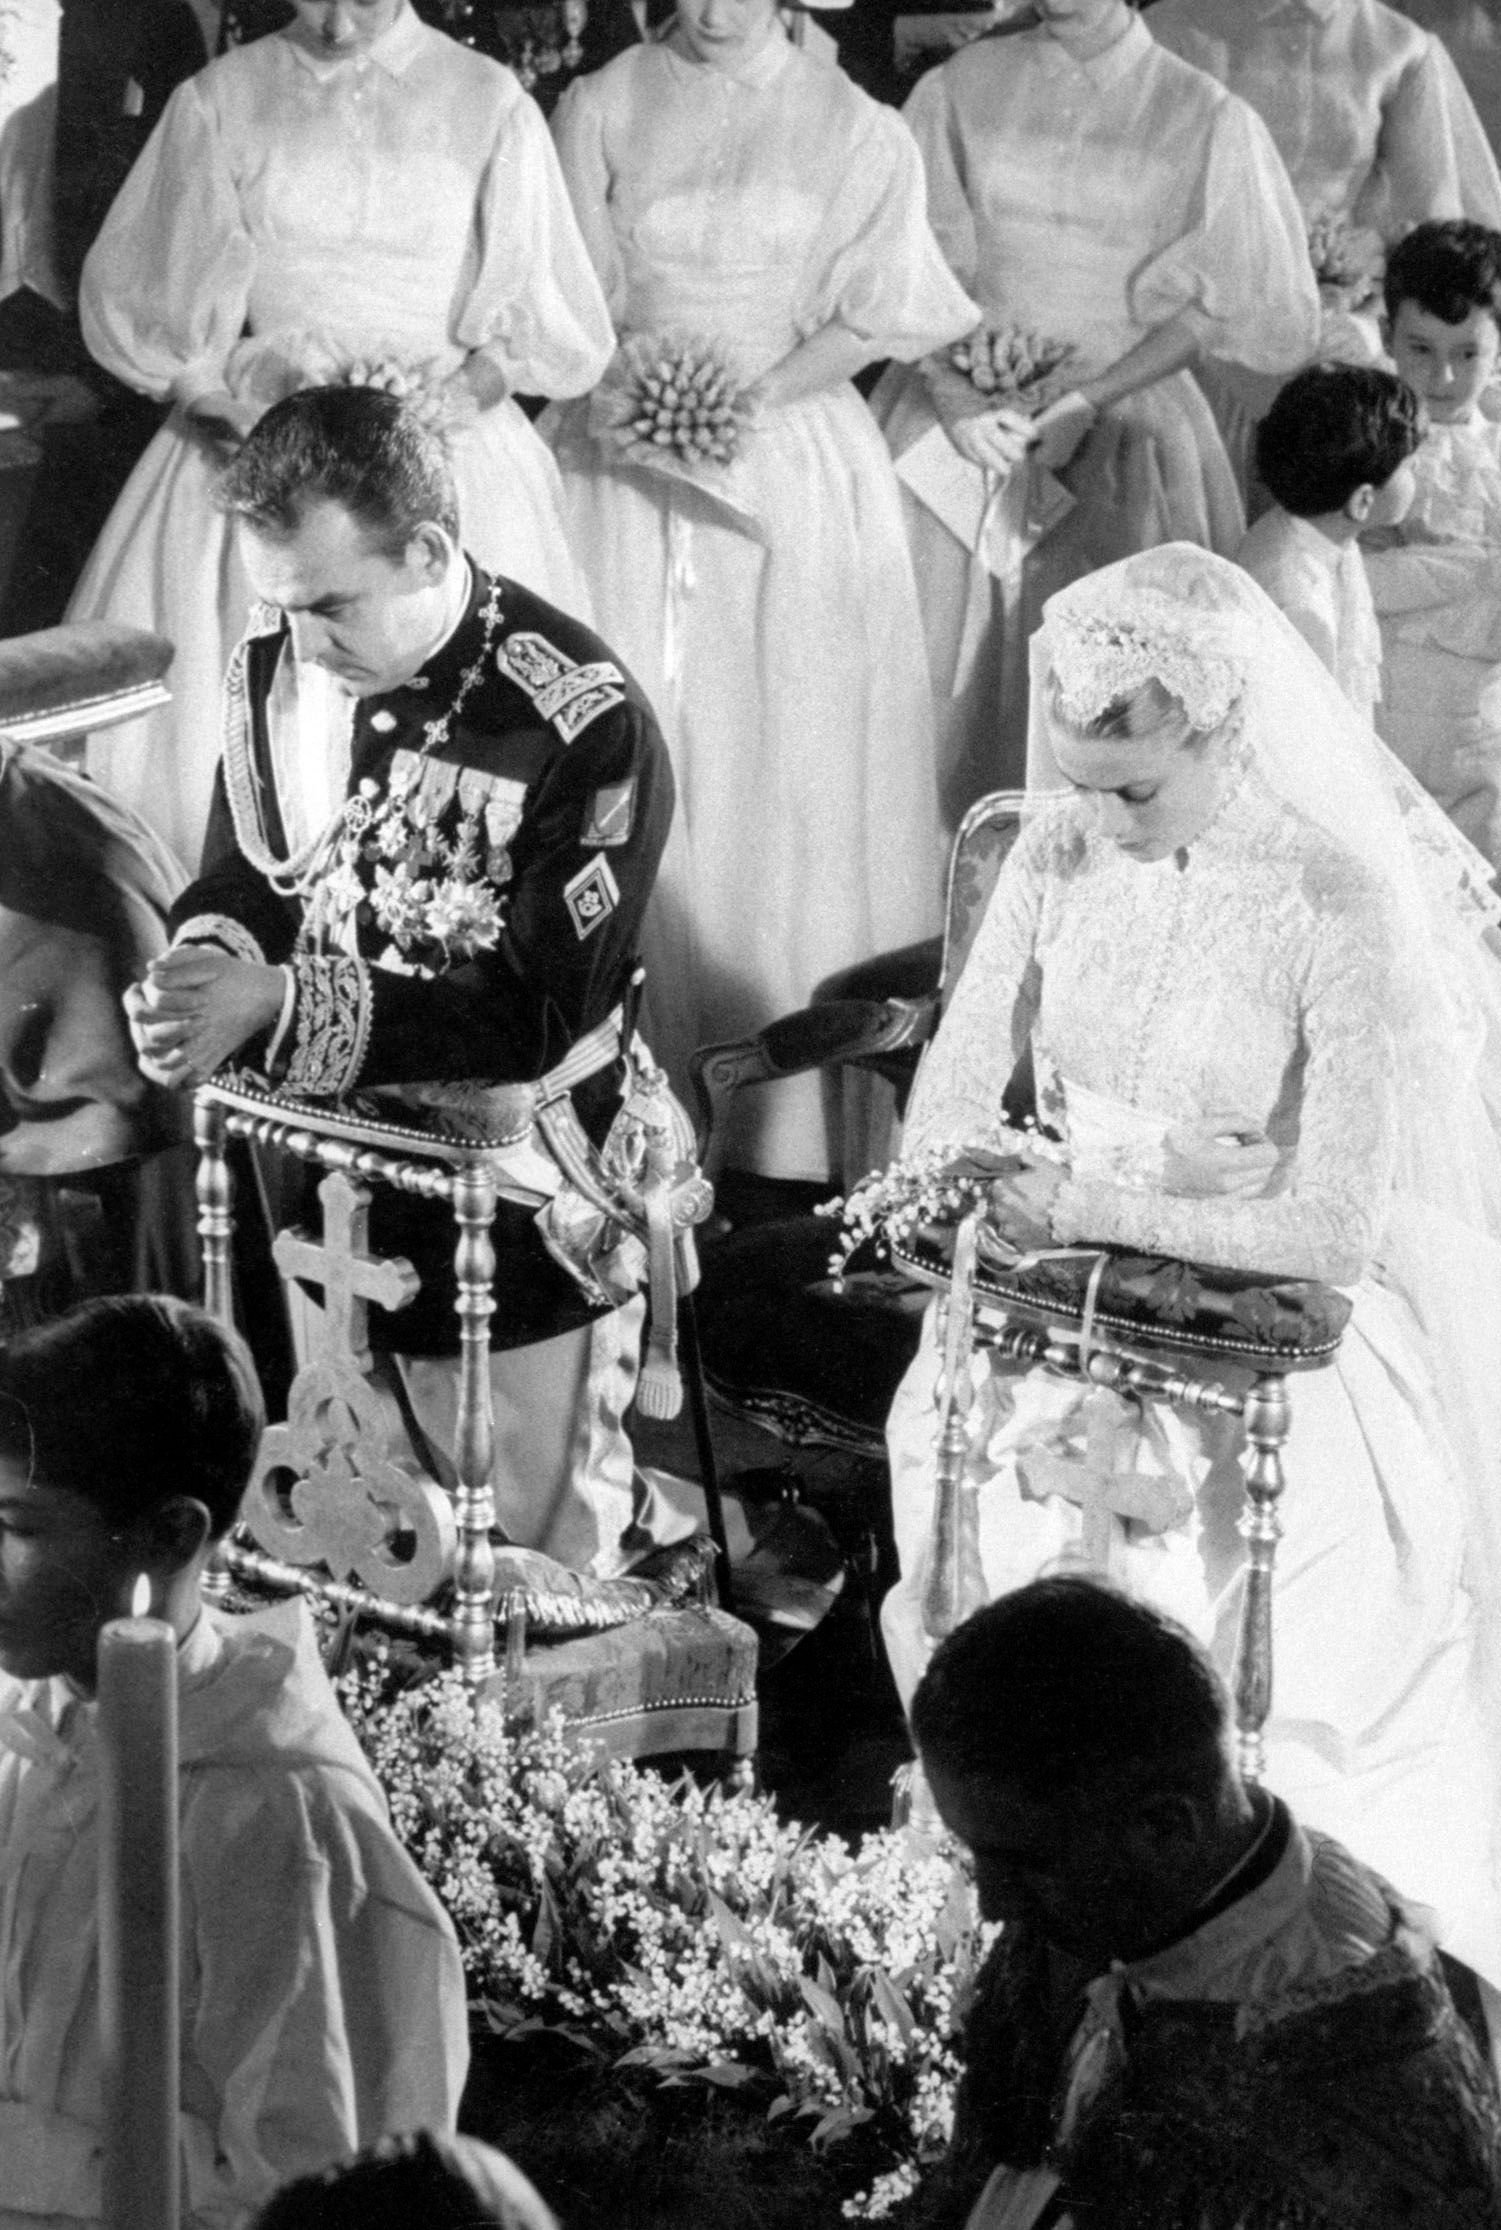 Prince Rainier kneeling during Mass in the Cathedral while marrying Grace Kelly in 1956, in Monaco. | Source: Thomas D. Mcavoy/The LIFE Picture Collection/Getty Images